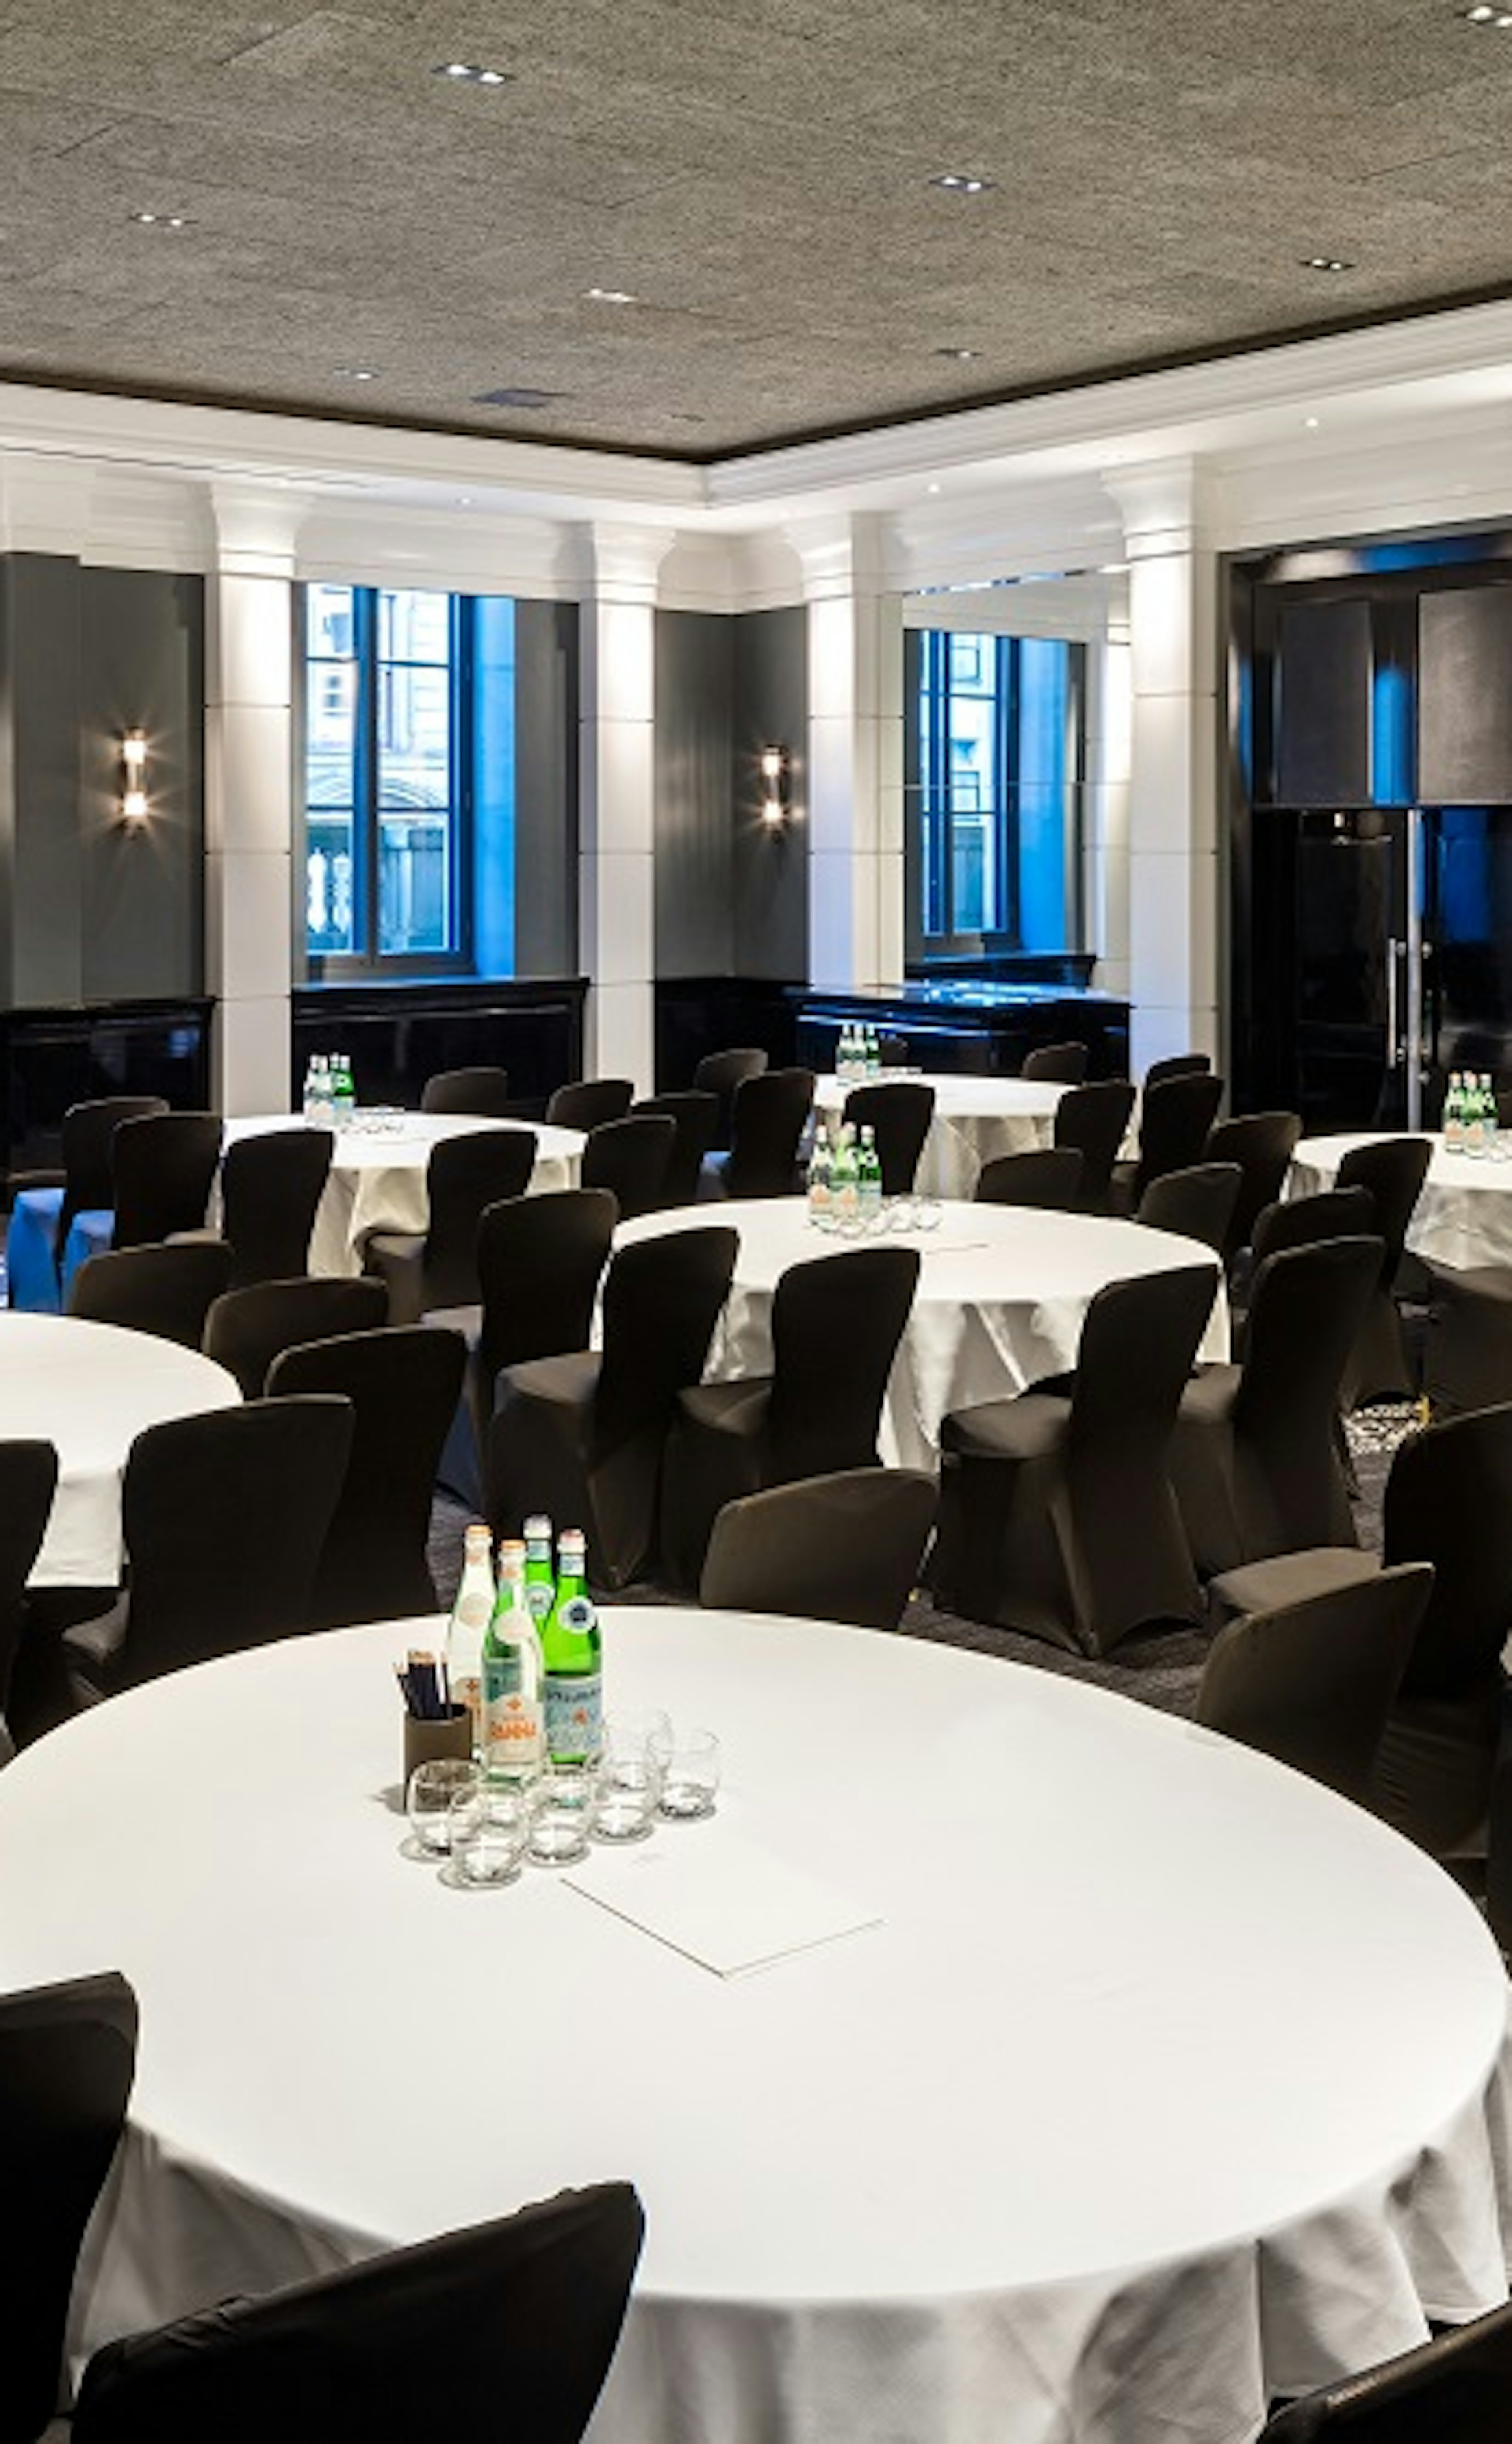 Product Launch Venues - The Edwardian Manchester, A Radisson Collection Hotel